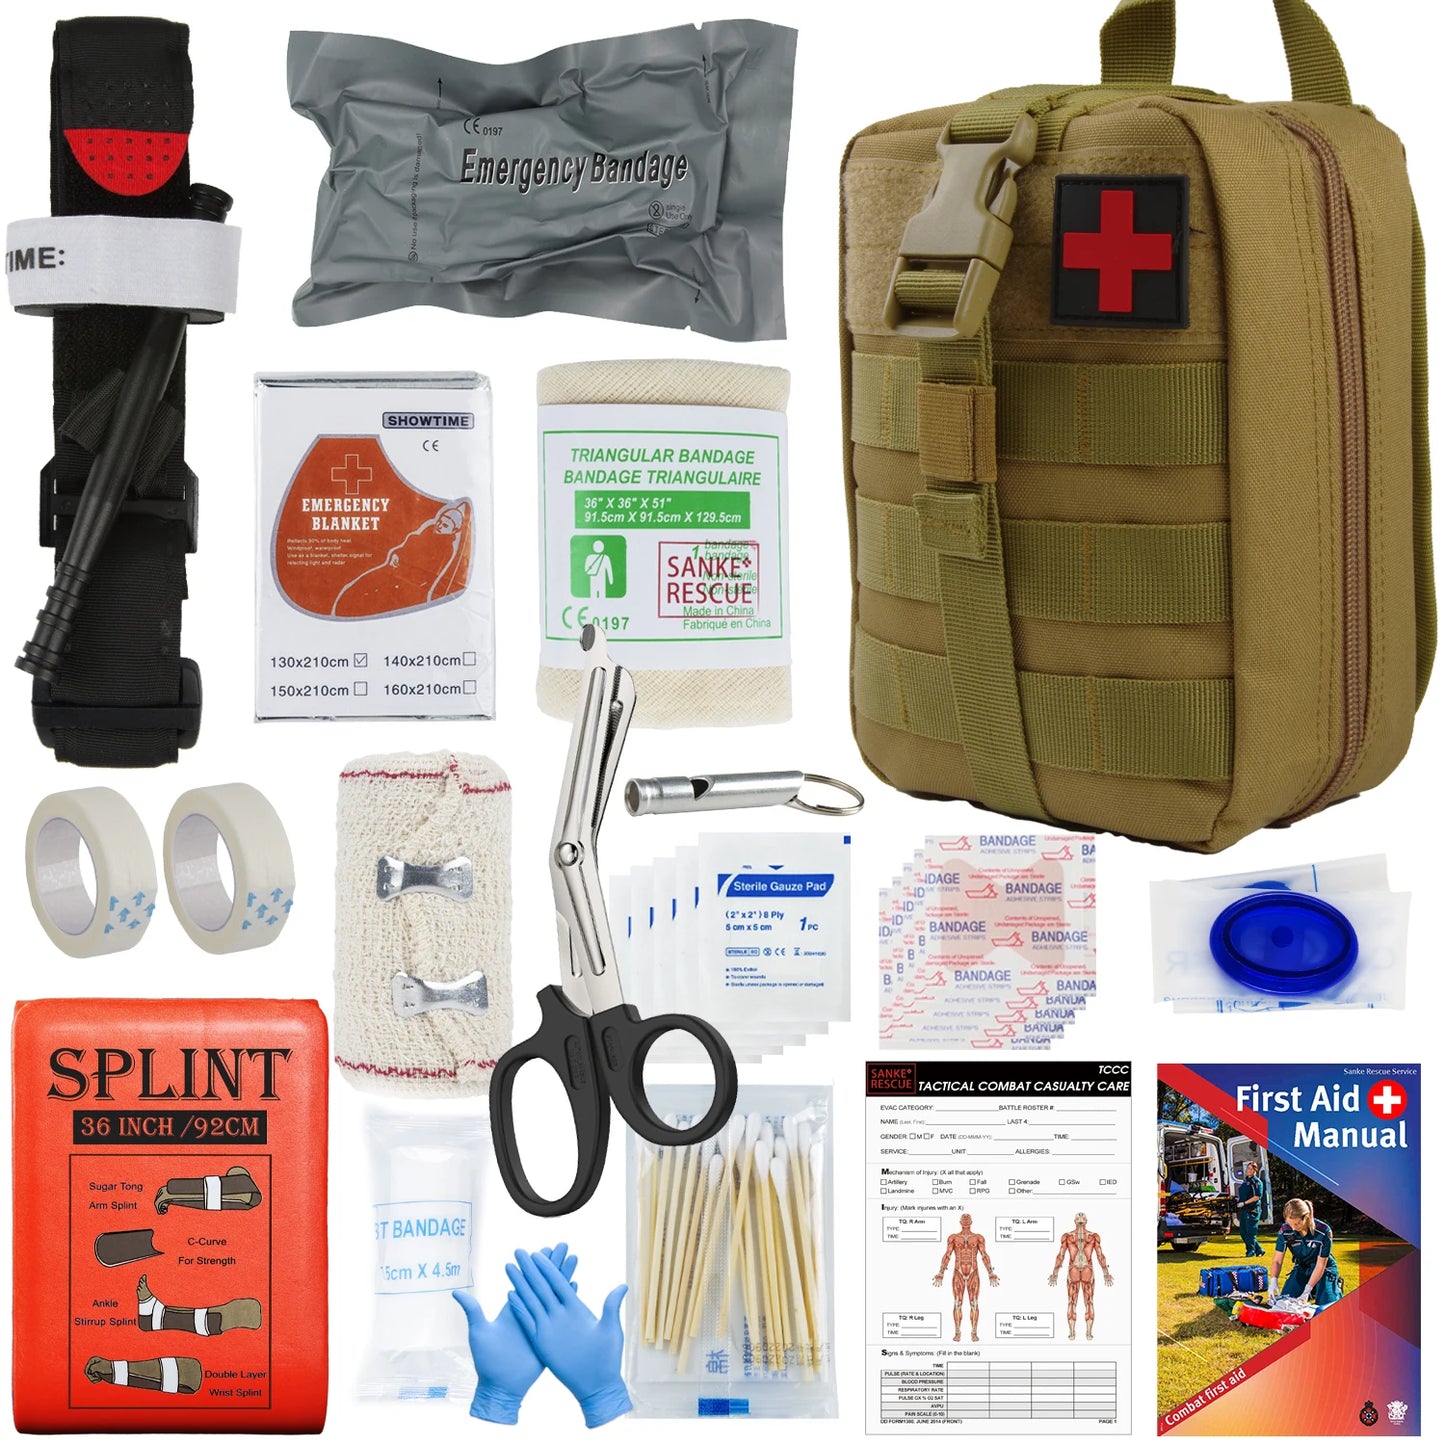 First Aid Survival Kit